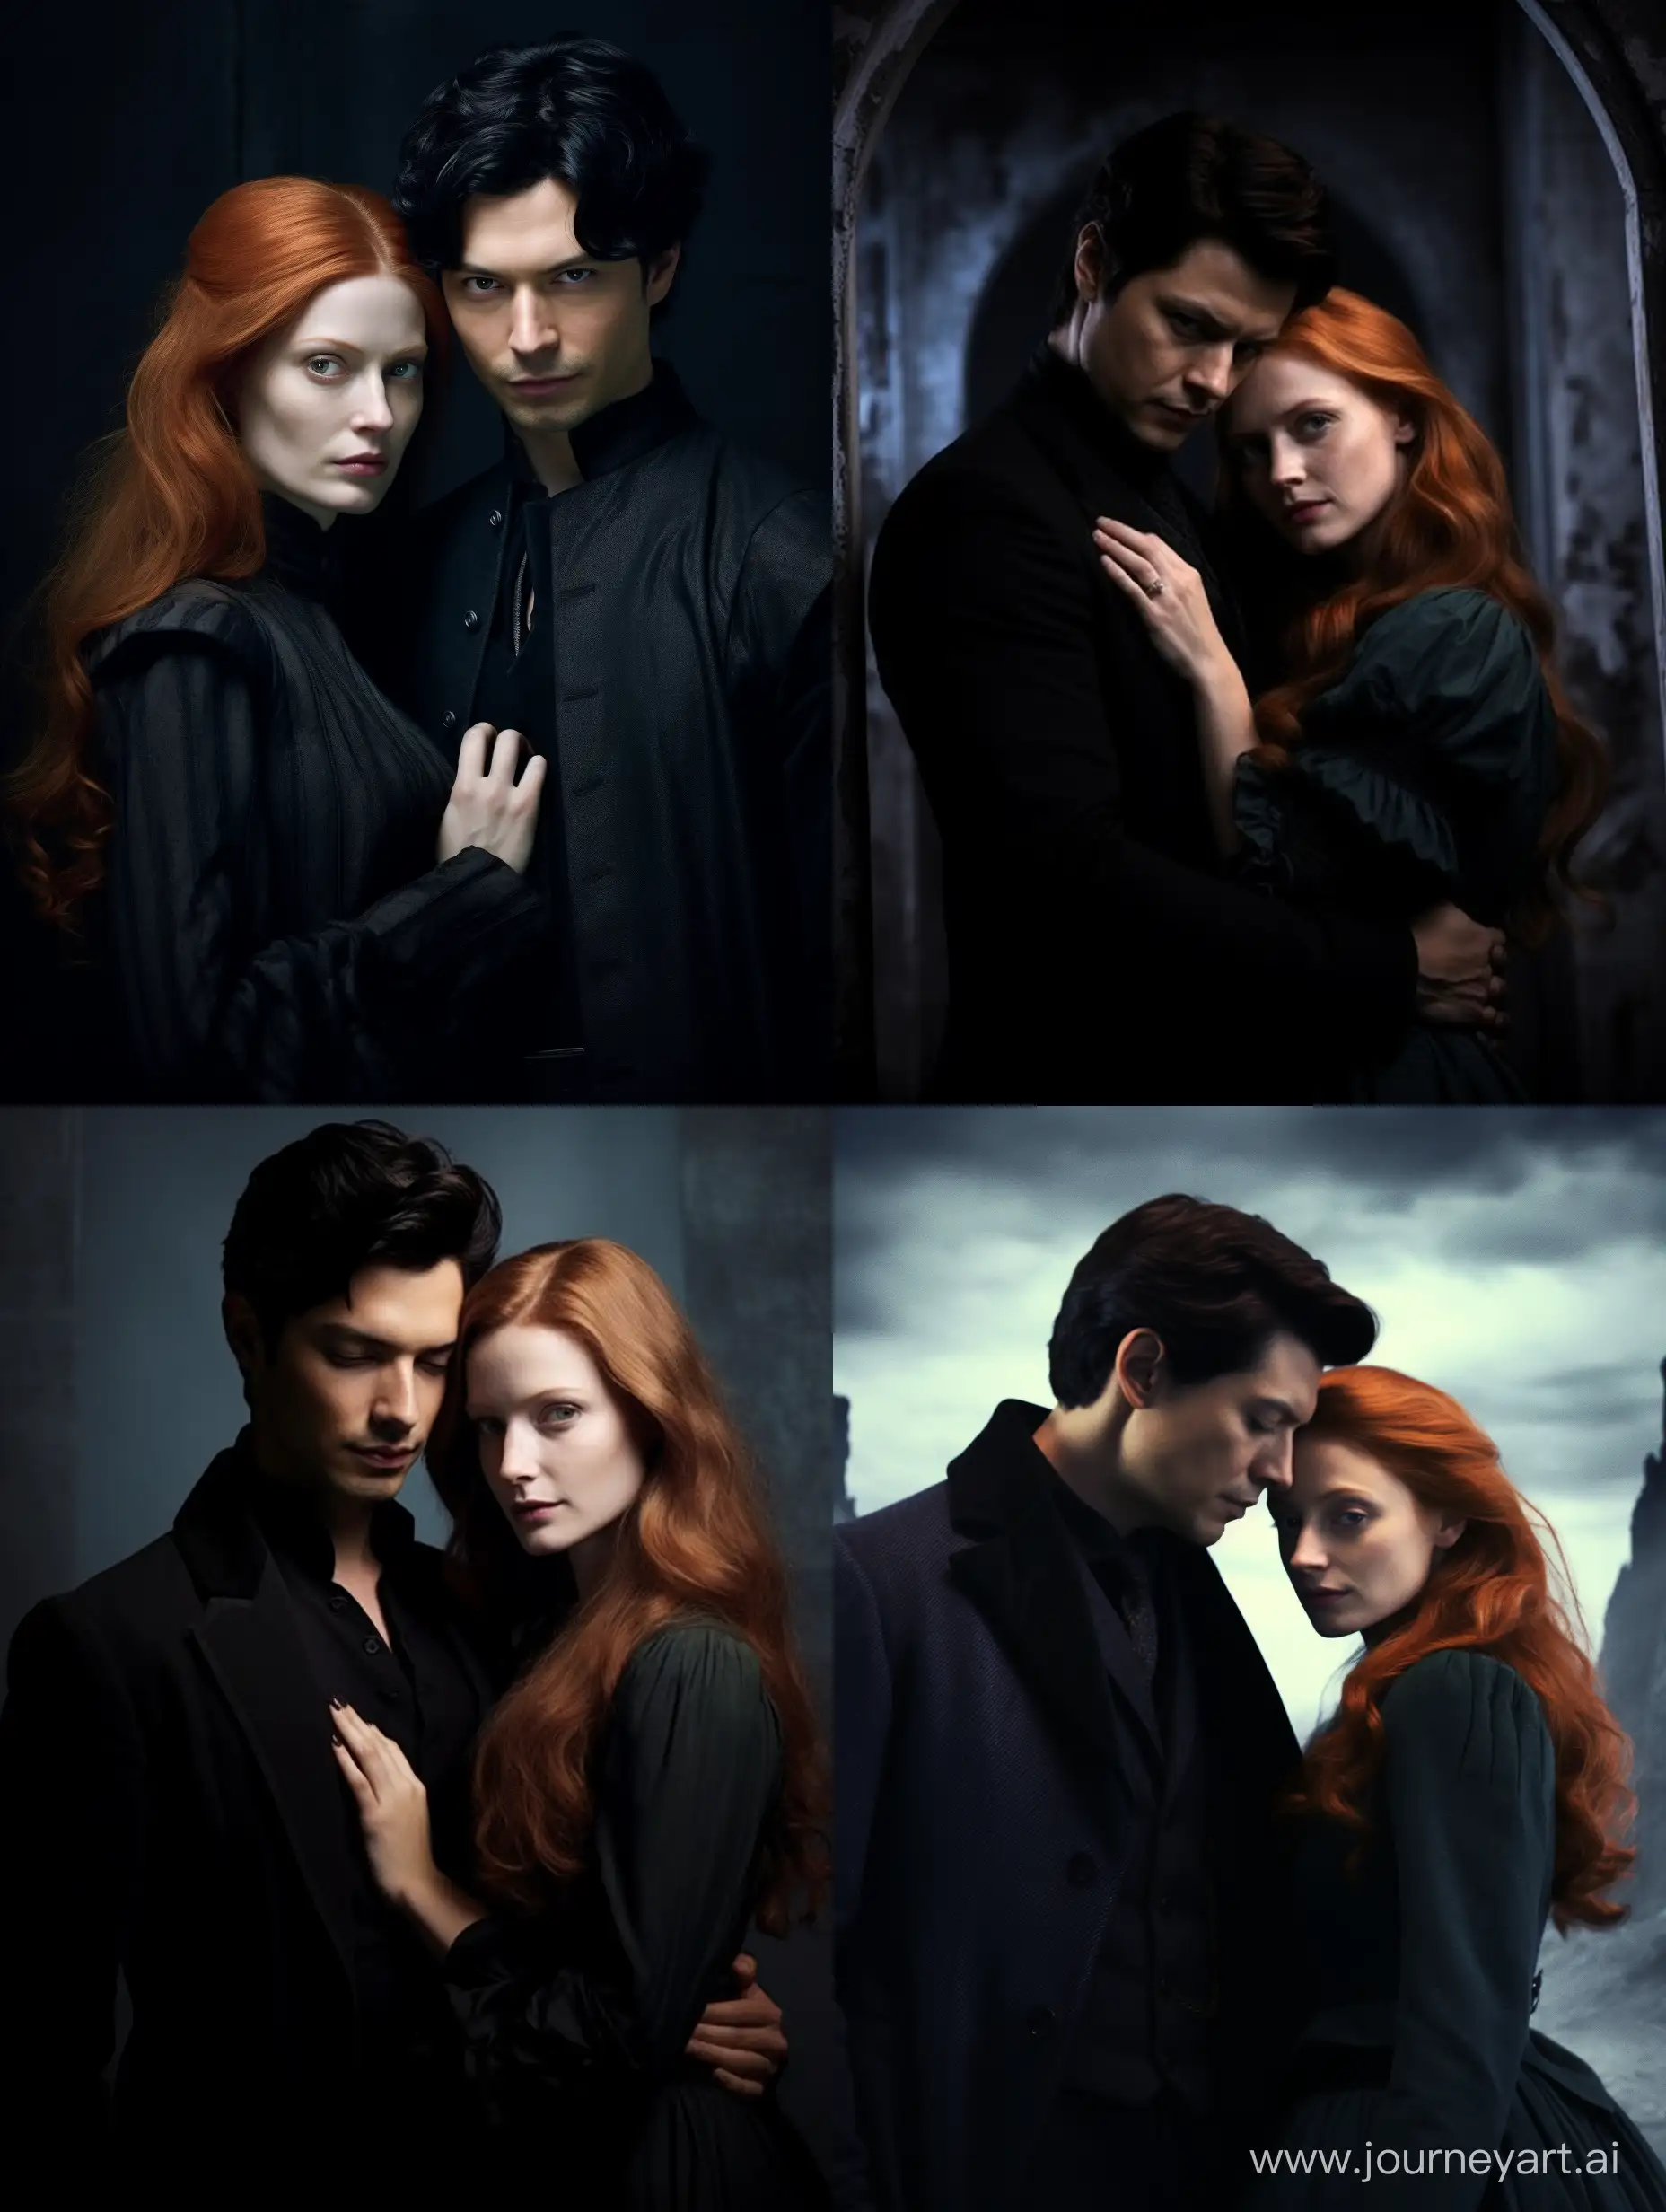 christian coulson as voldemort and bonnie wrigth as ginny weasley, dark magic